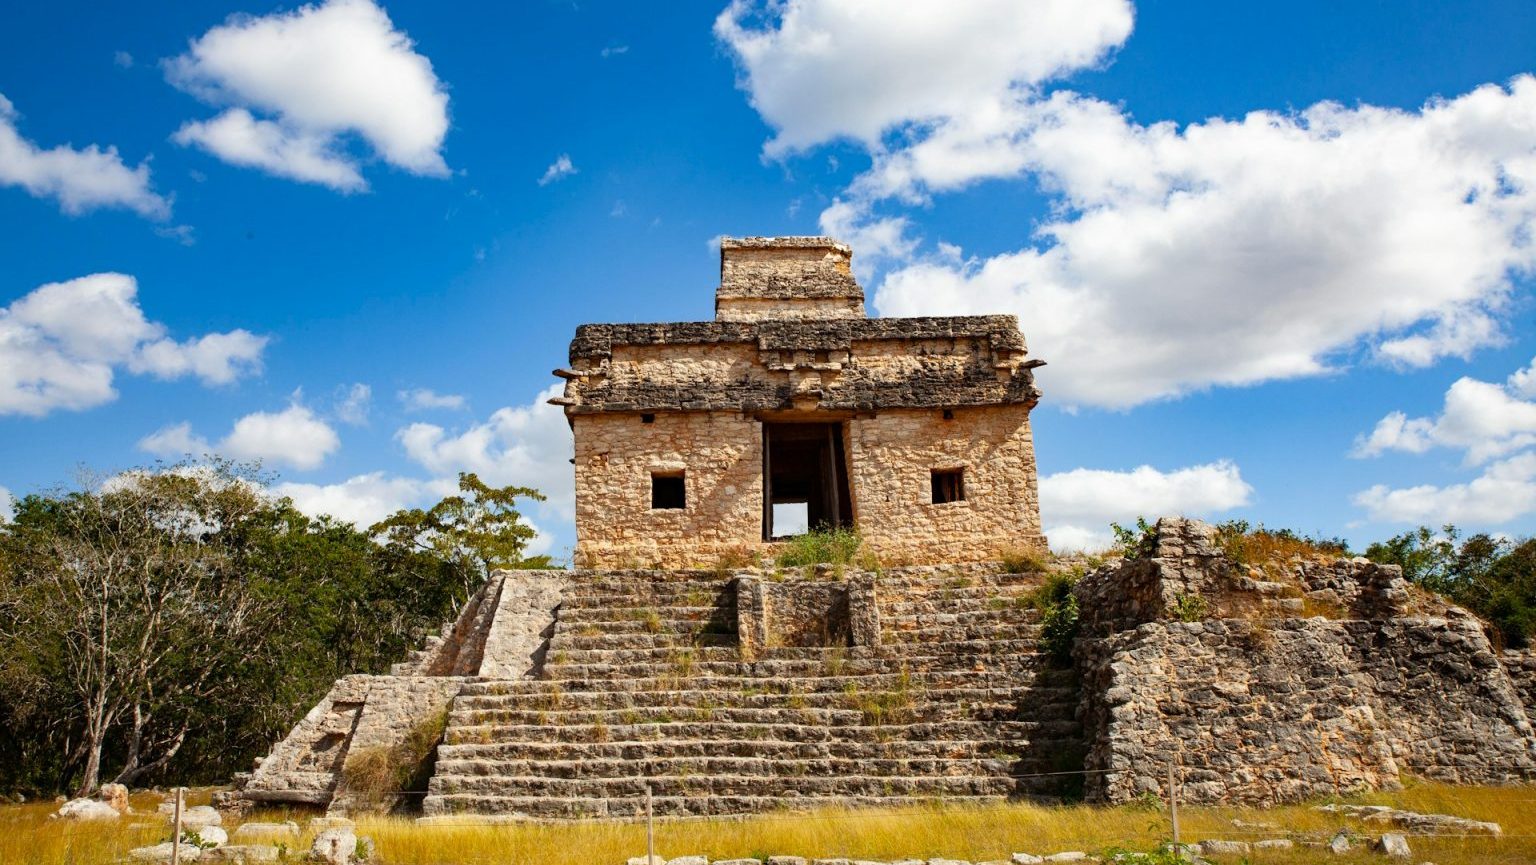 Ancient stone structure with stairs under a blue sky with scattered clouds, surrounded by vegetation.